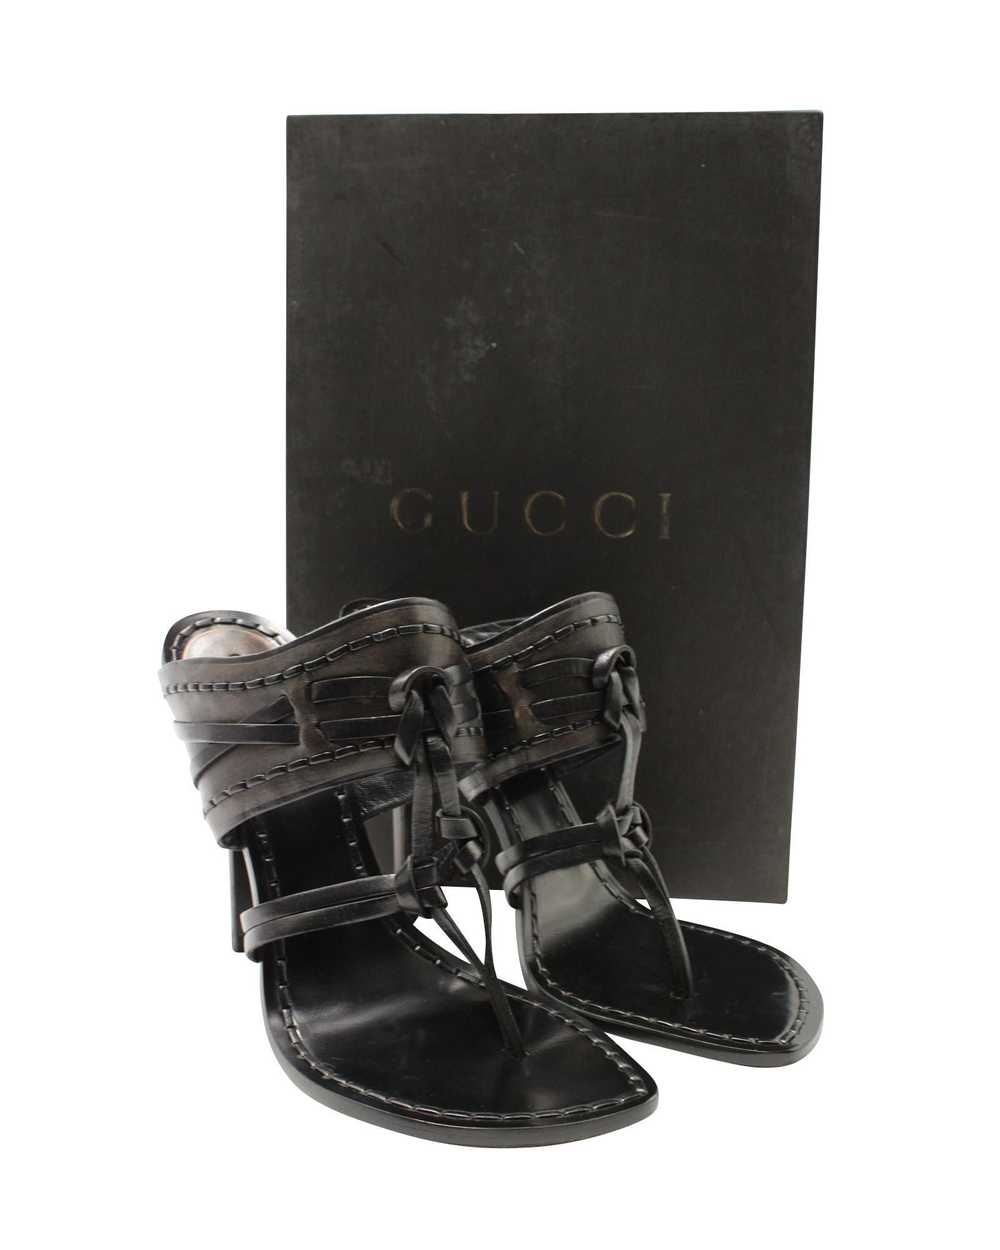 Gucci Strappy Black Leather High Heel Mules by a … - image 10